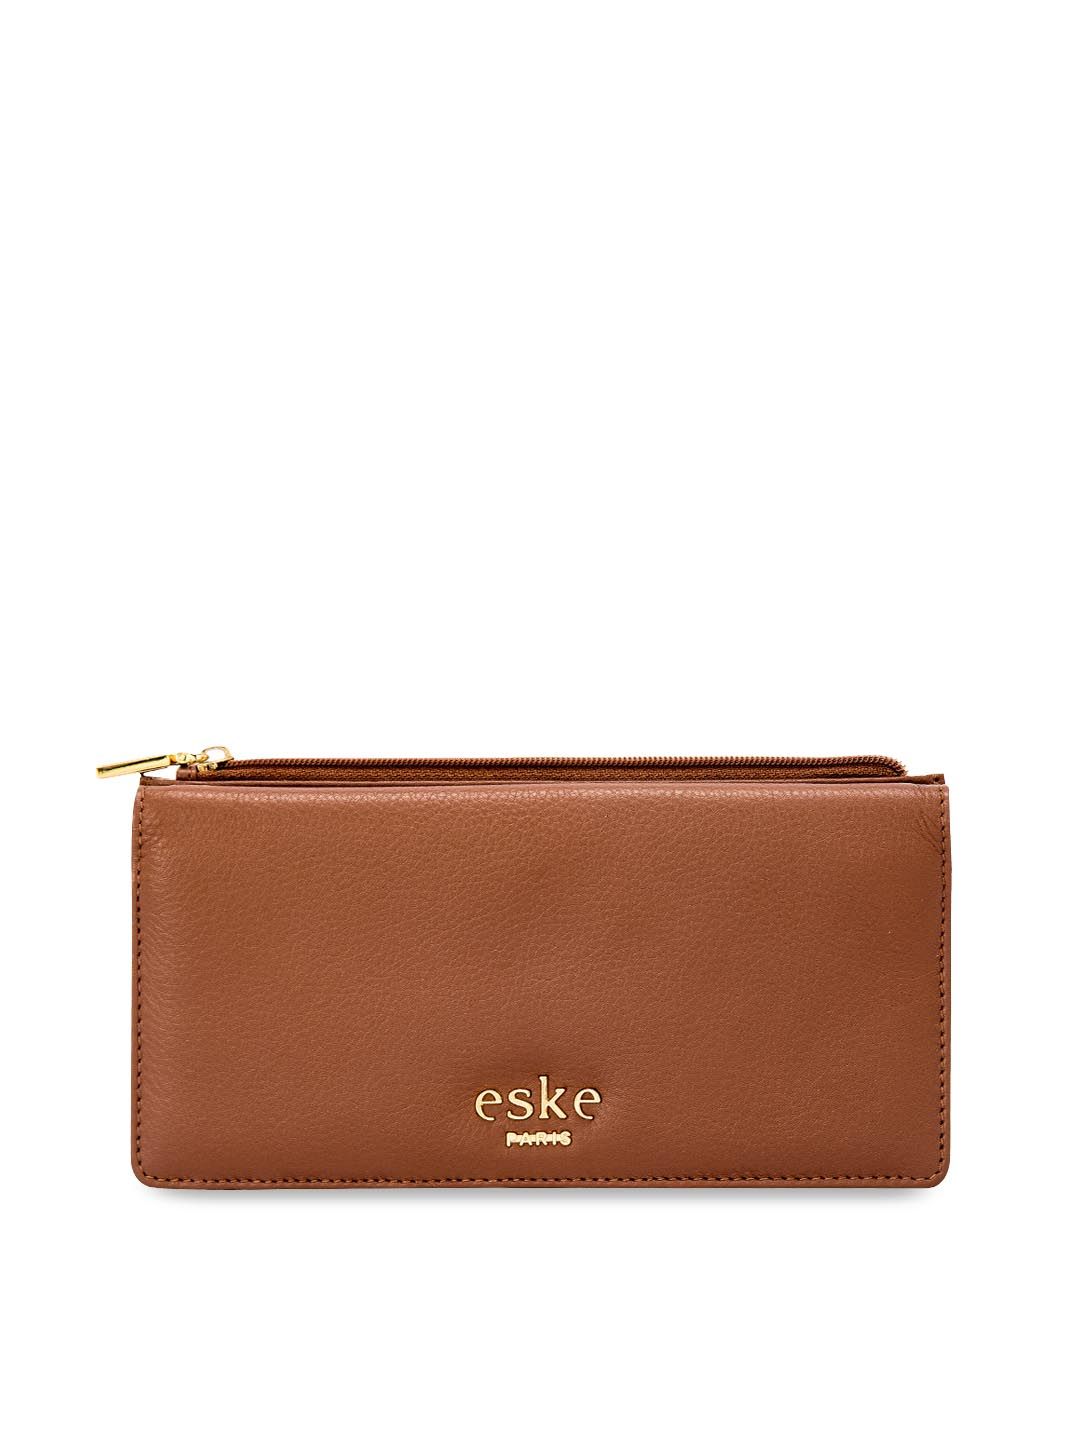 Eske Women Brown Solid Leather Two Fold Wallet Price in India